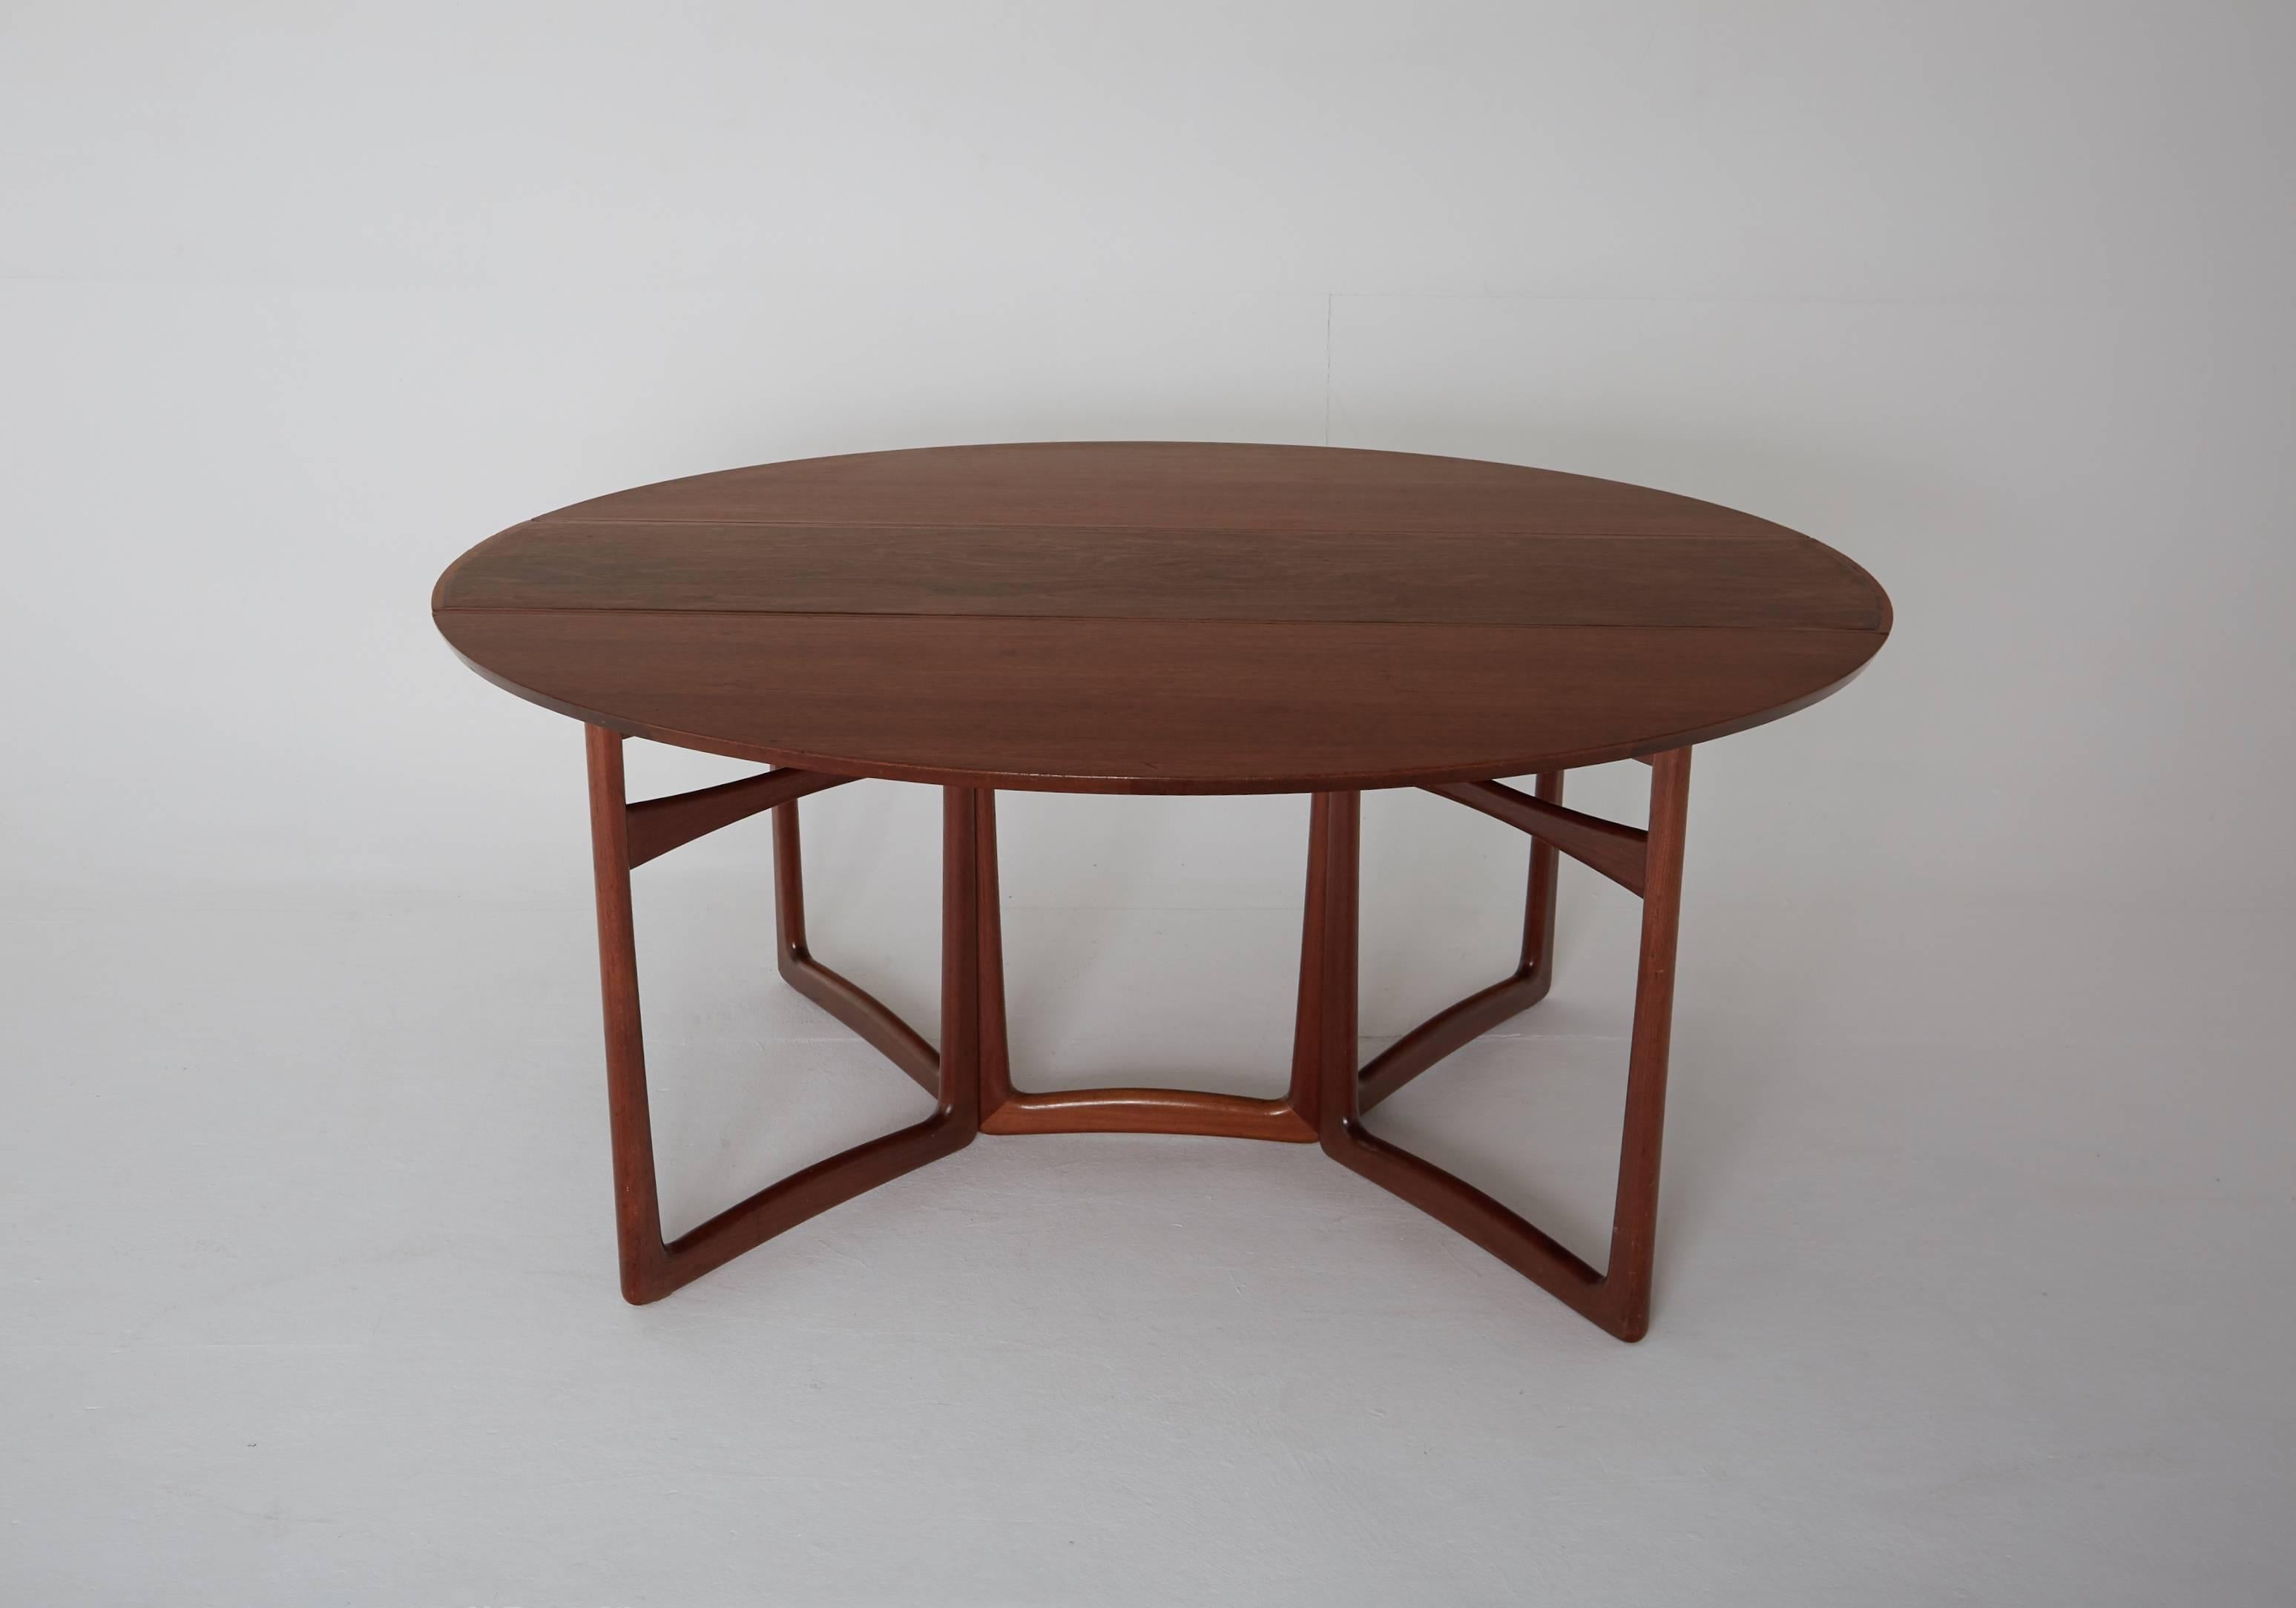 Model 20/59 folding / drop-leaf dining table was designed in circa 1955 by Peter Hvidt & Orla Mølgaard for France & Søn. Made from solid teak with two fold-down leaves, brass details and a gate leg frame. When fully extended the table is 143 cm